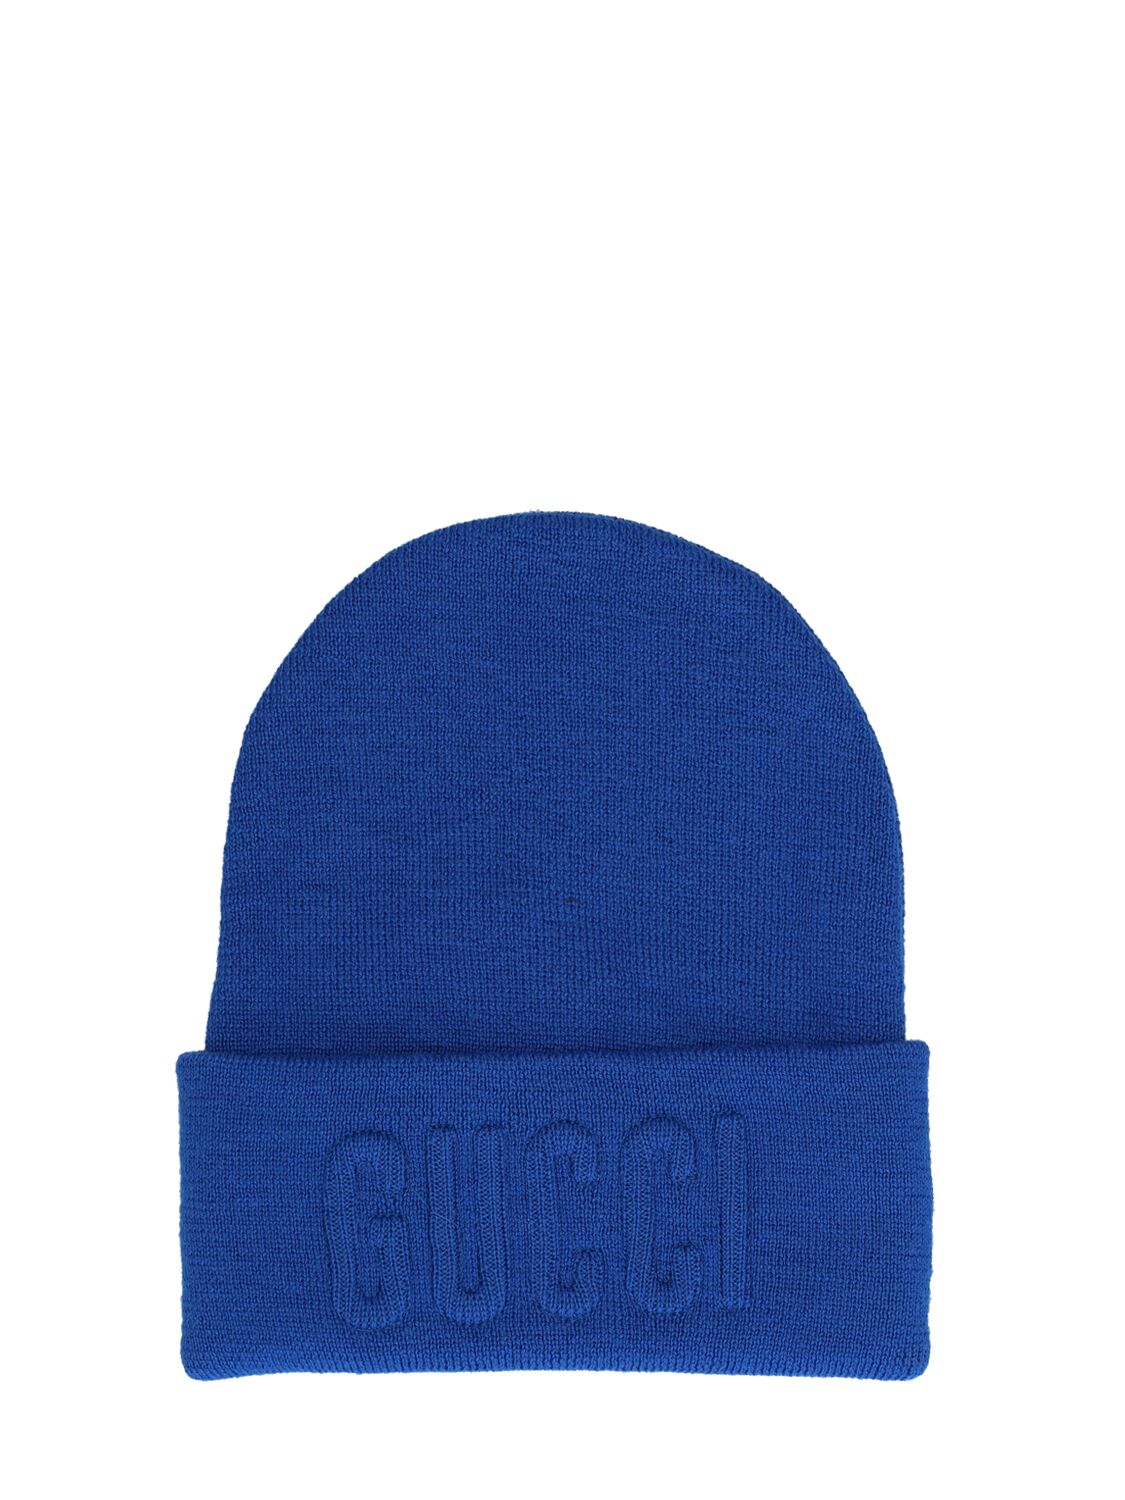 Embroidered Wool Knit Beanie – MEN > ACCESSORIES > HATS